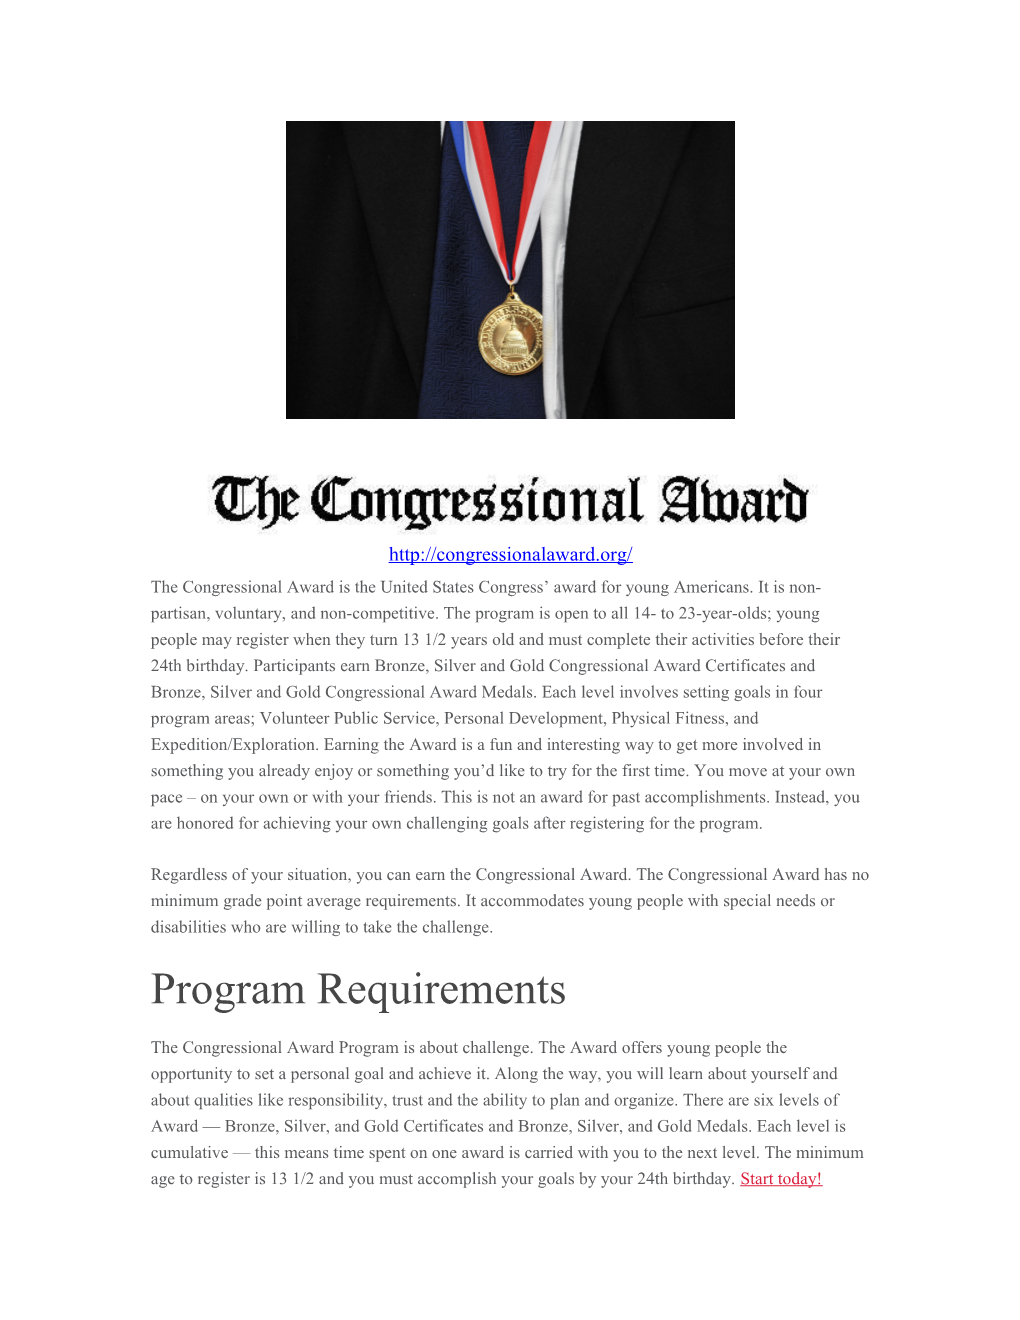 Regardless of Your Situation, You Can Earn the Congressional Award. the Congressional Award